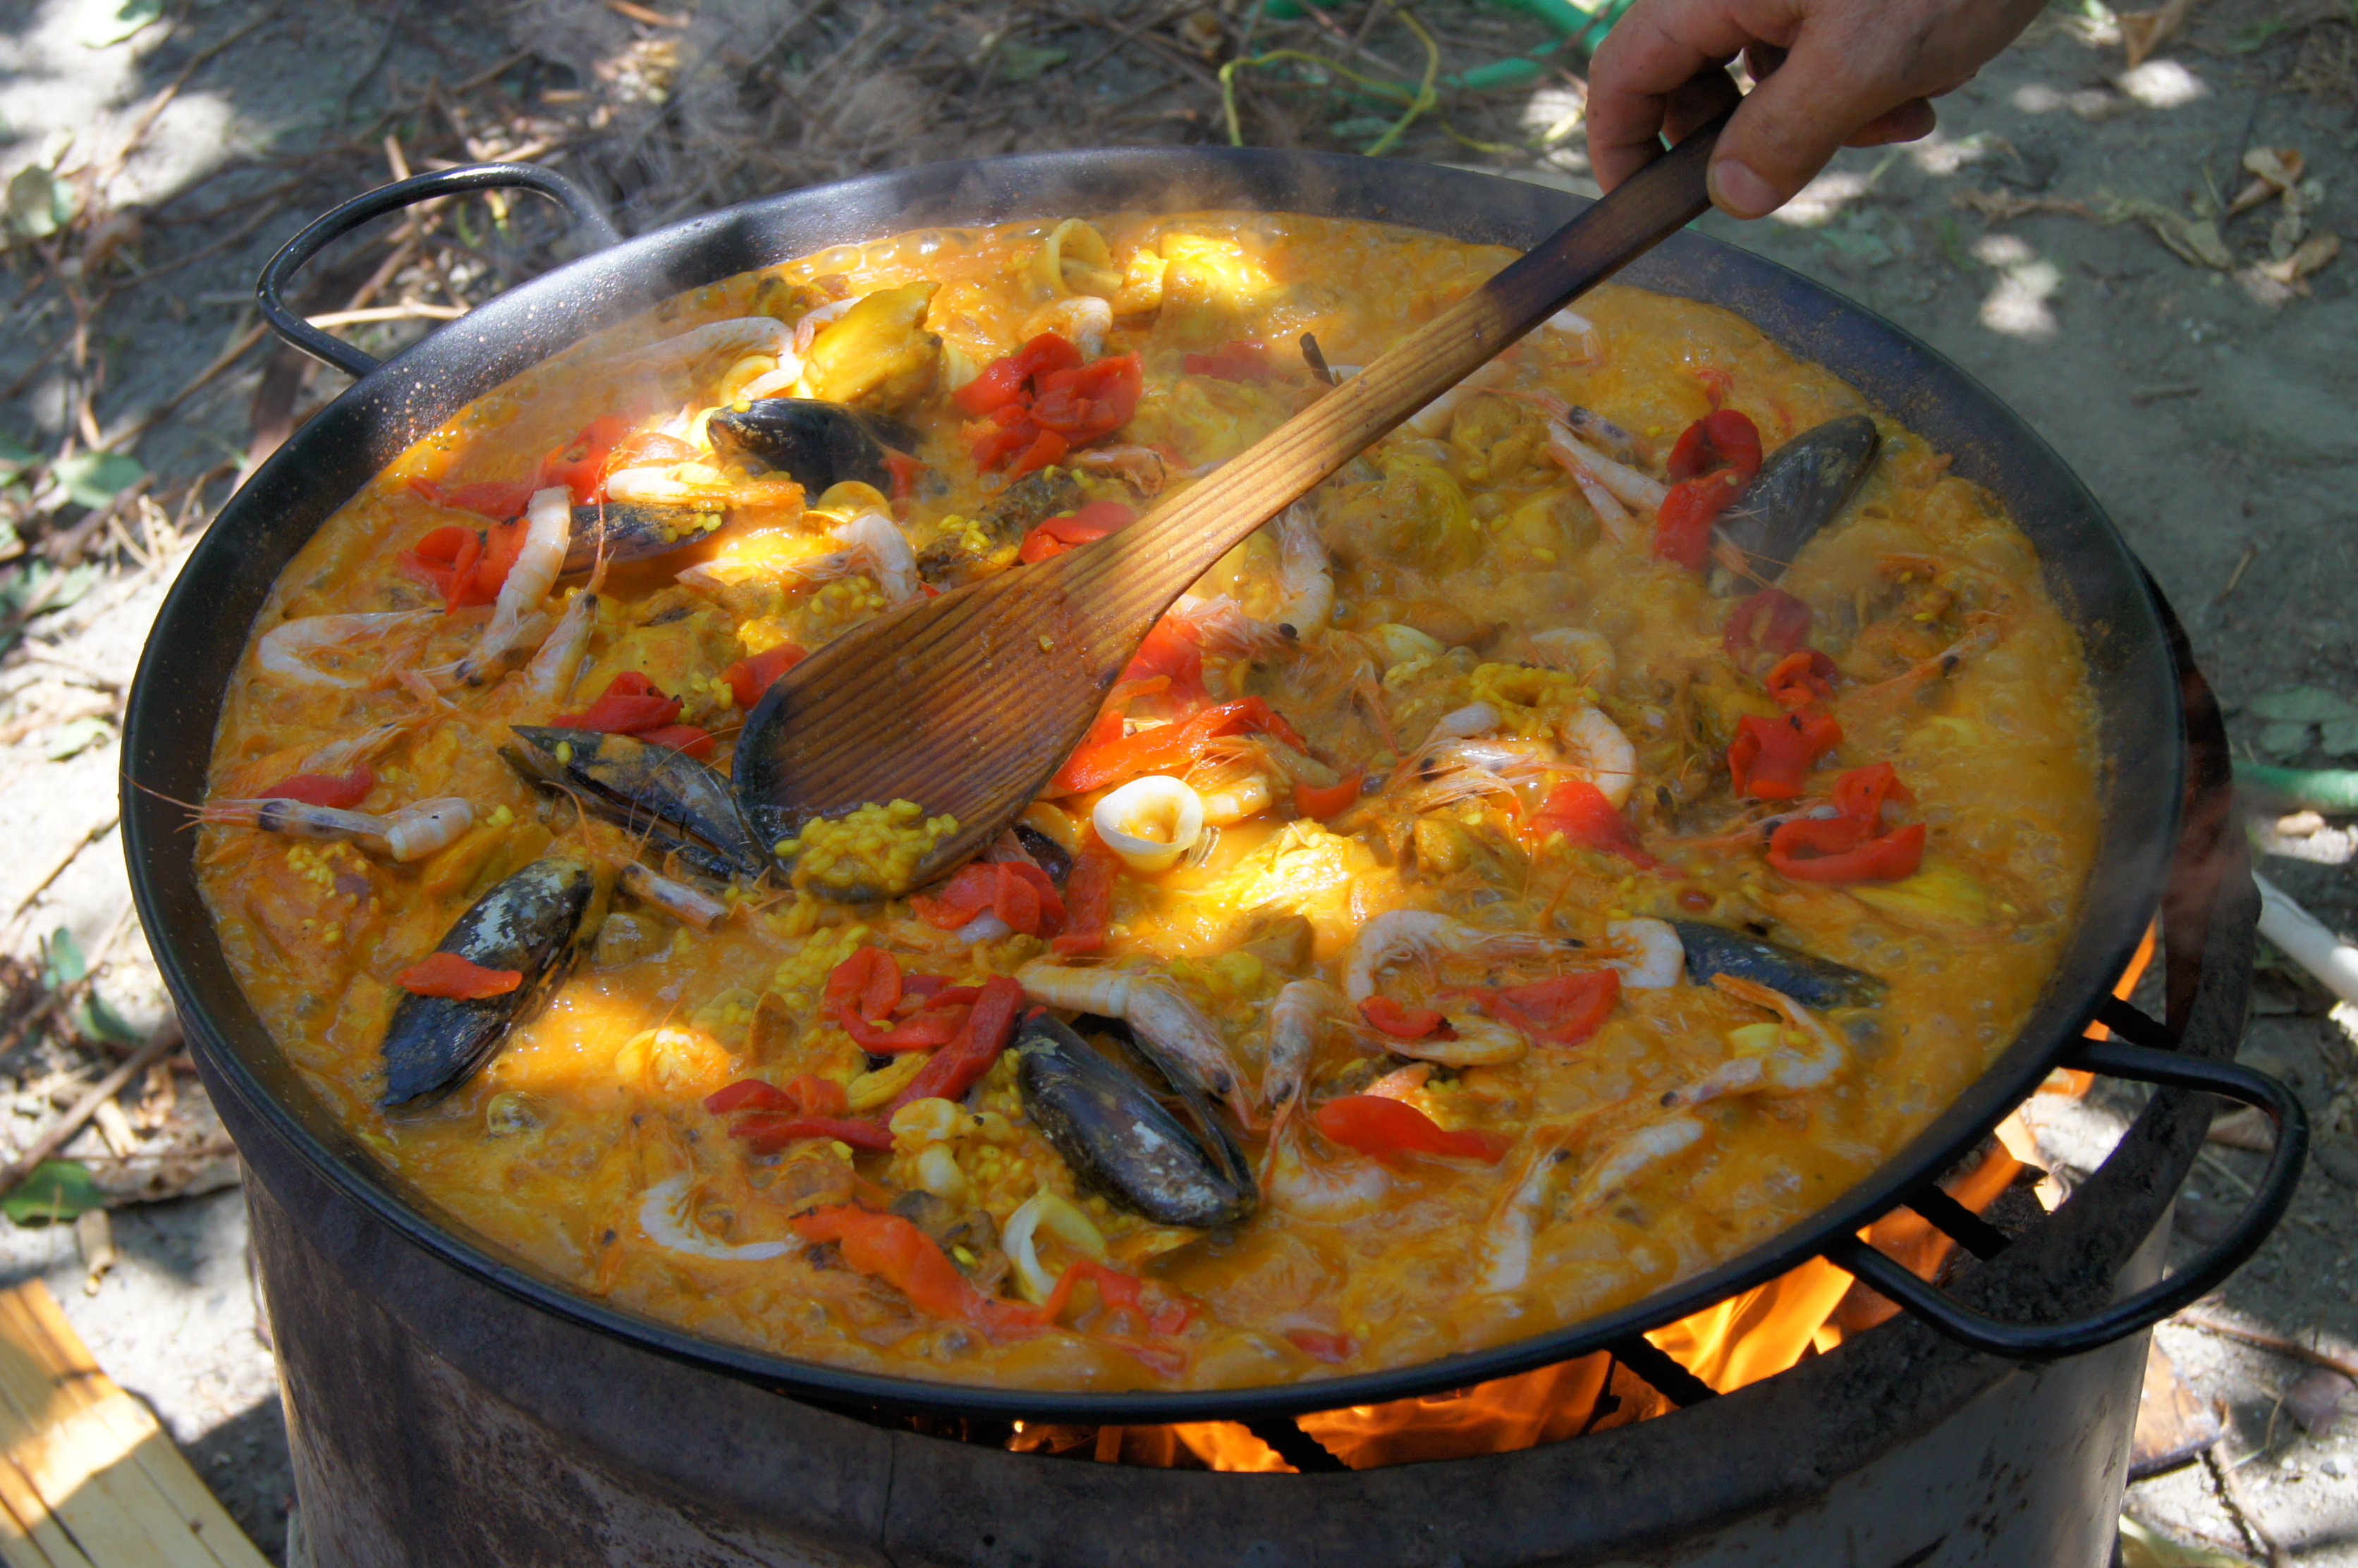 Cooking a paella